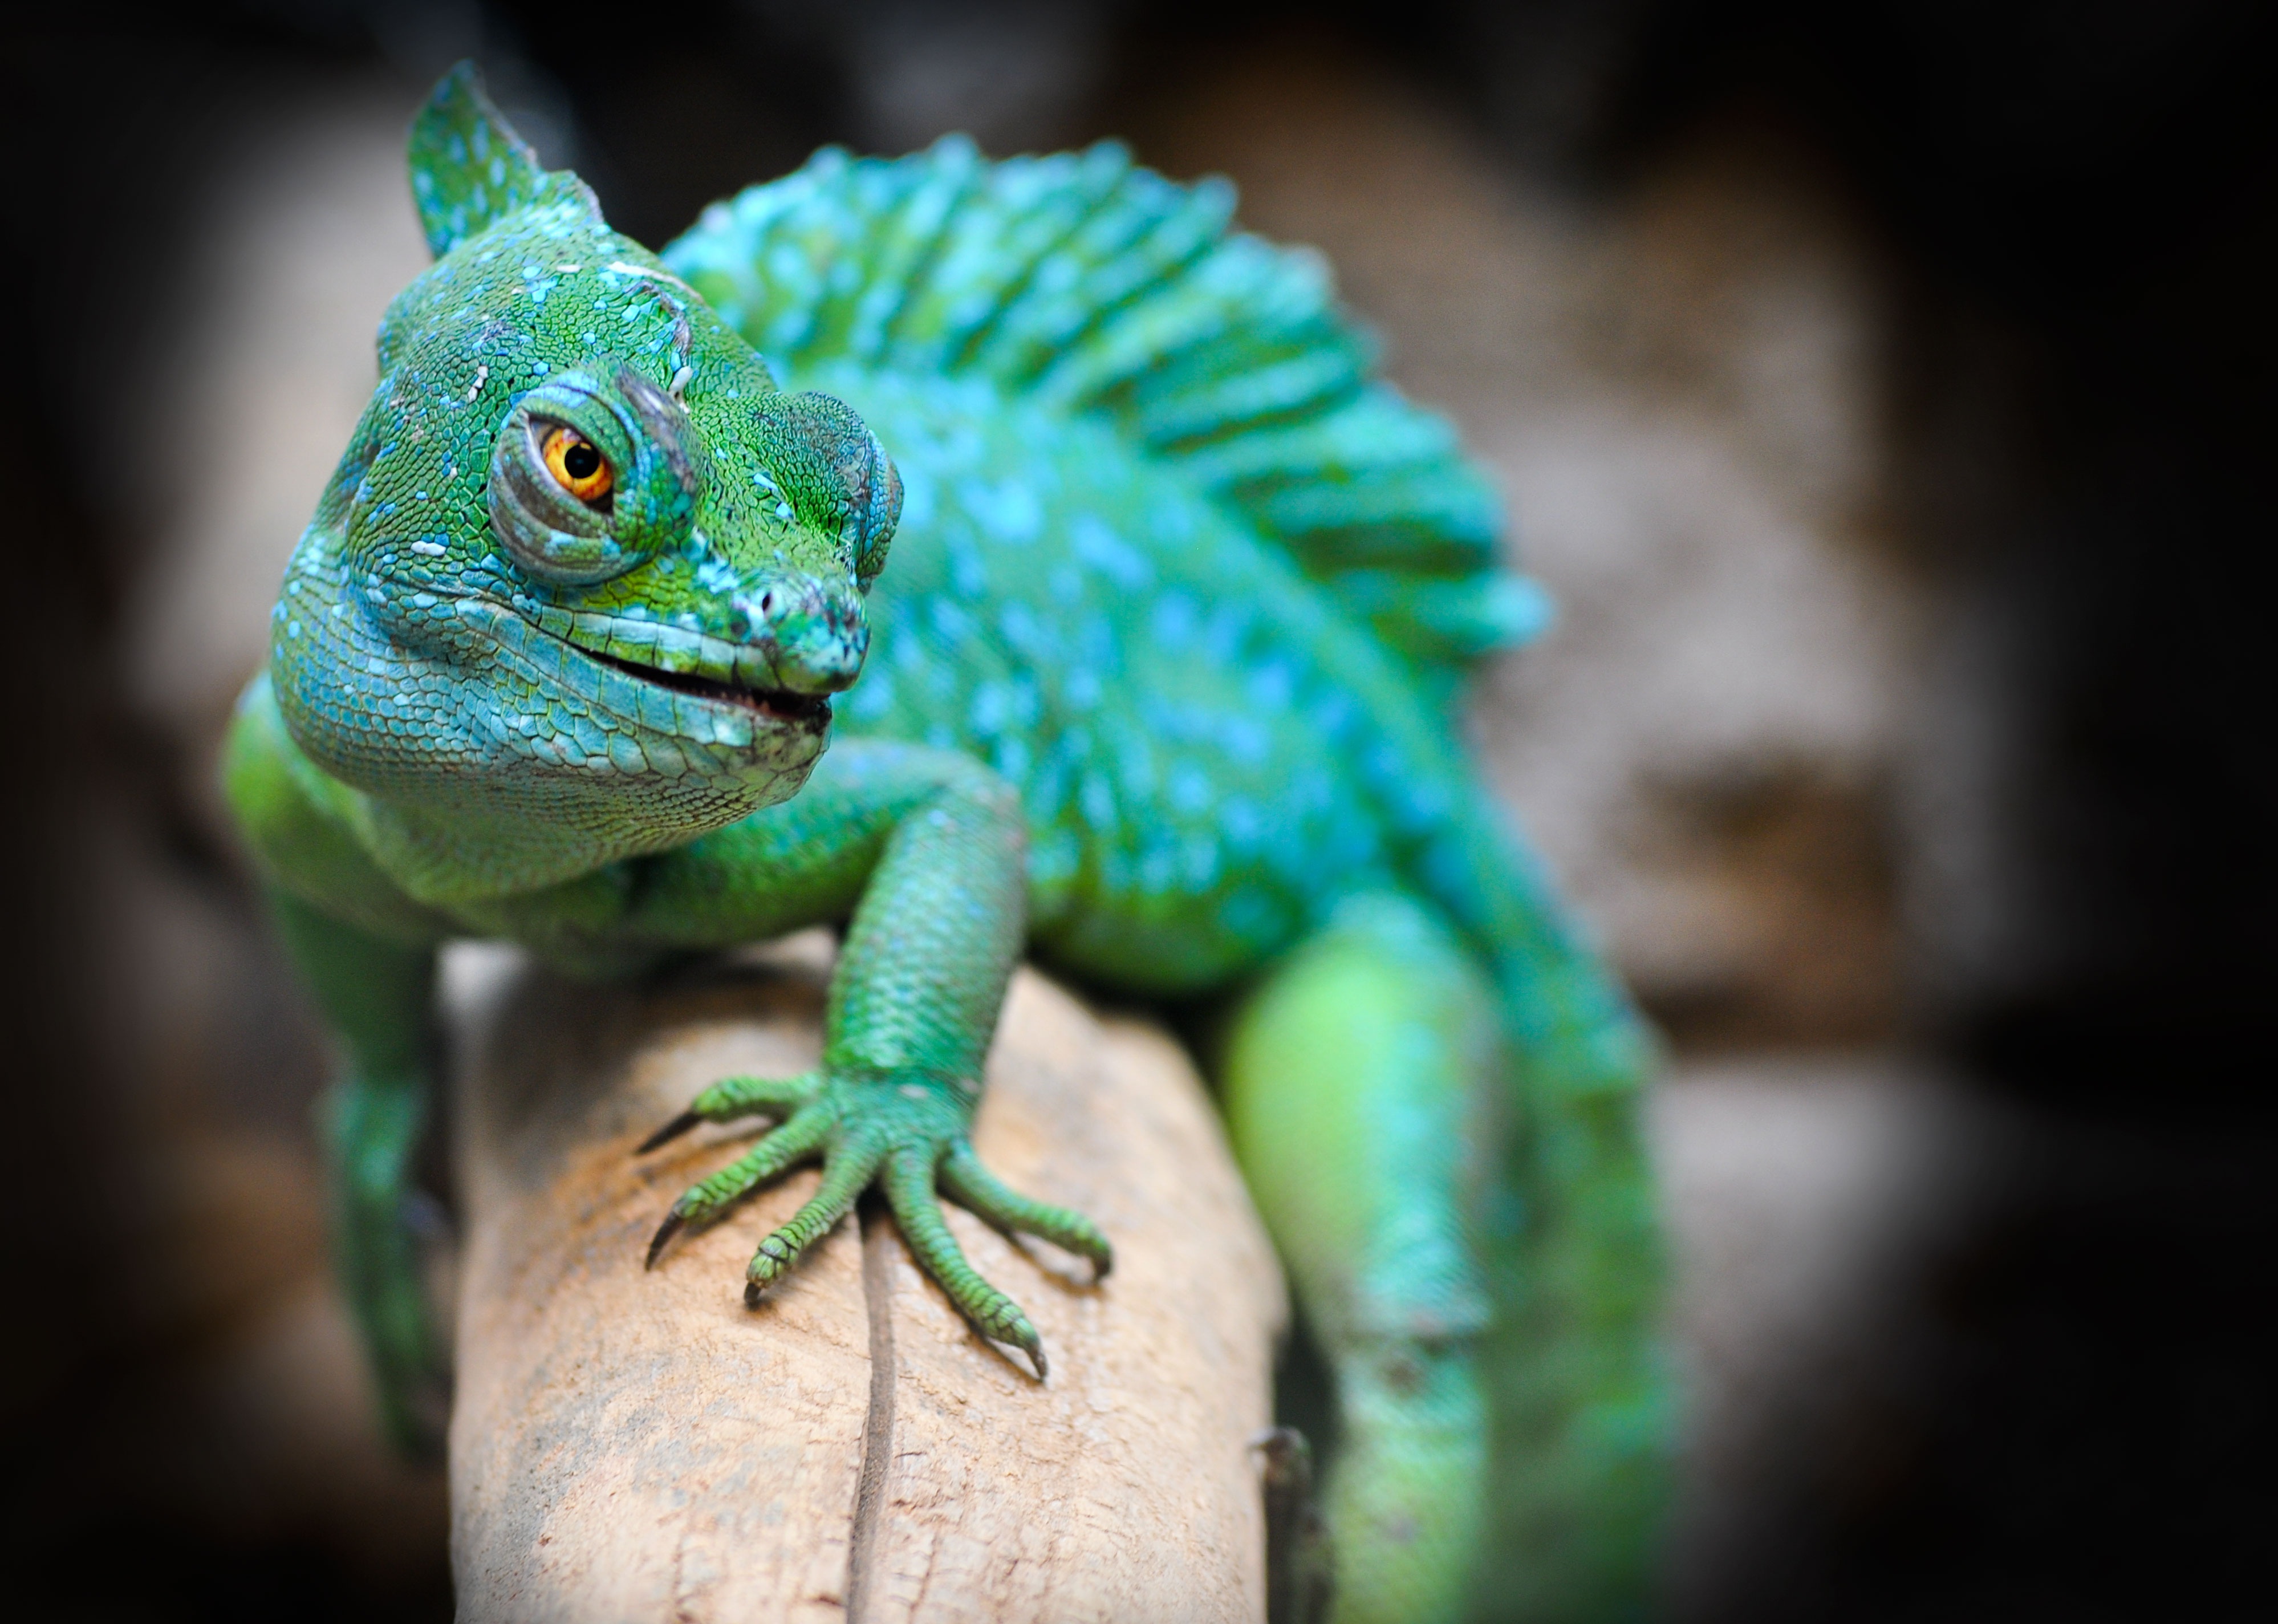 Wallpapers zoo green reptile on the desktop